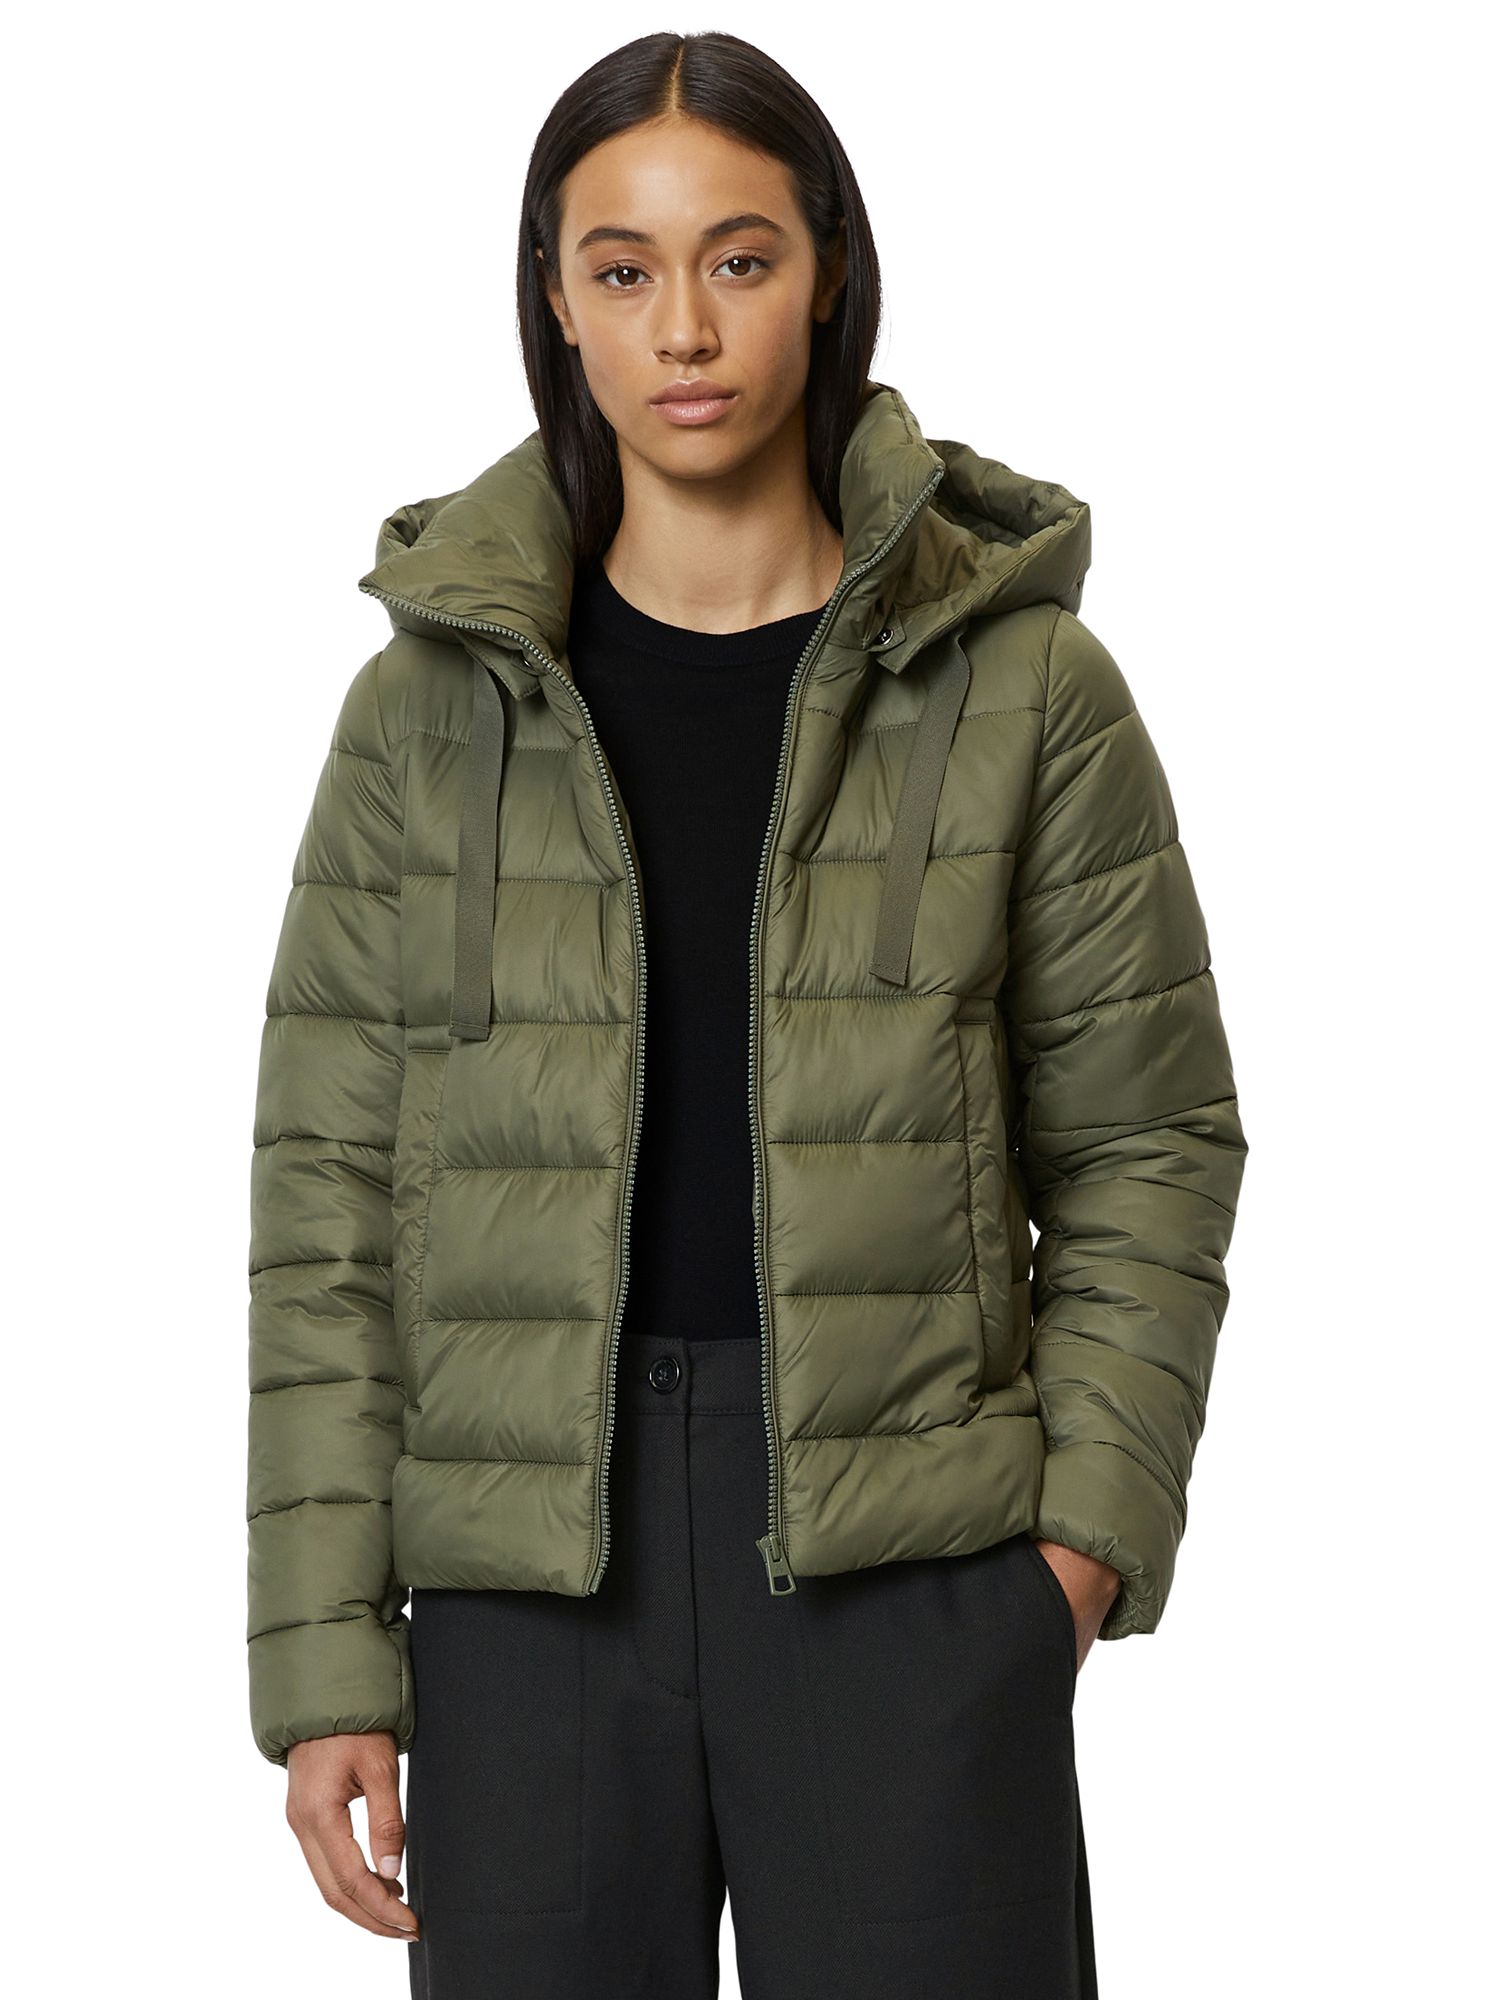 Marc O'Polo Lightweight Hooded Jacket, Olive at John Lewis & Partners